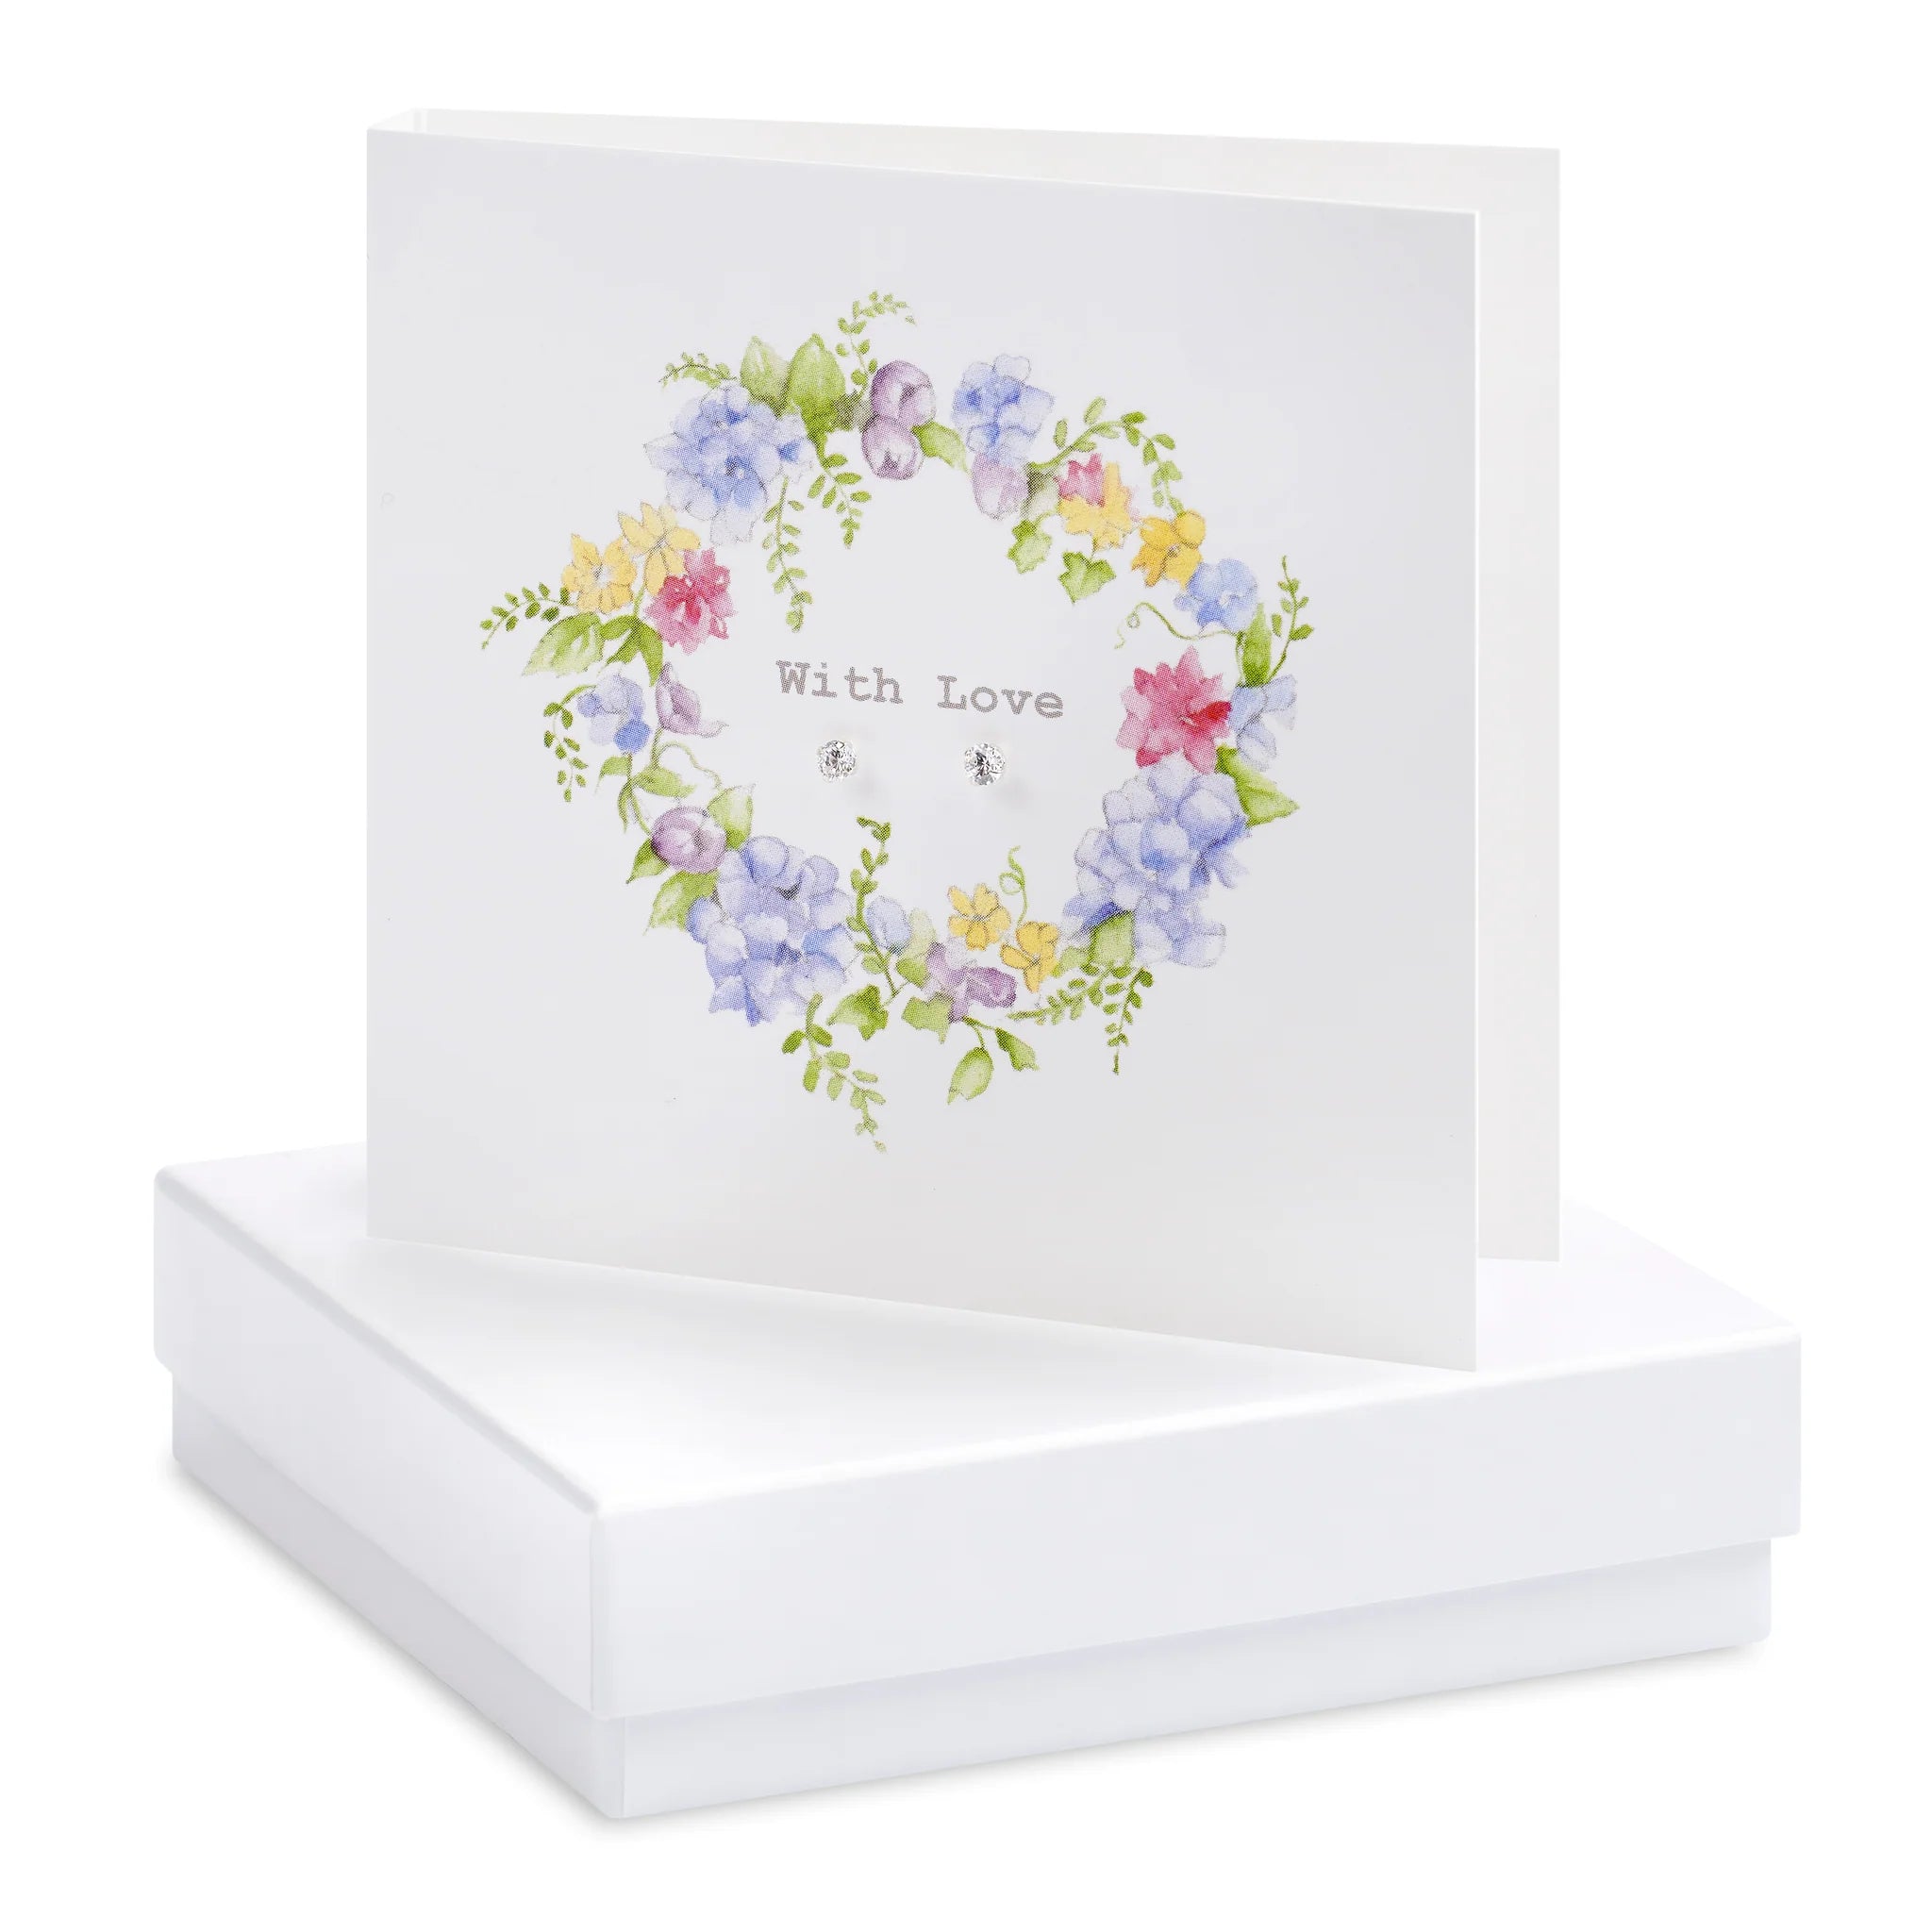 Crumble & Core With Love Wreath Card with Earrings in a White Box by Weirs of Baggot St